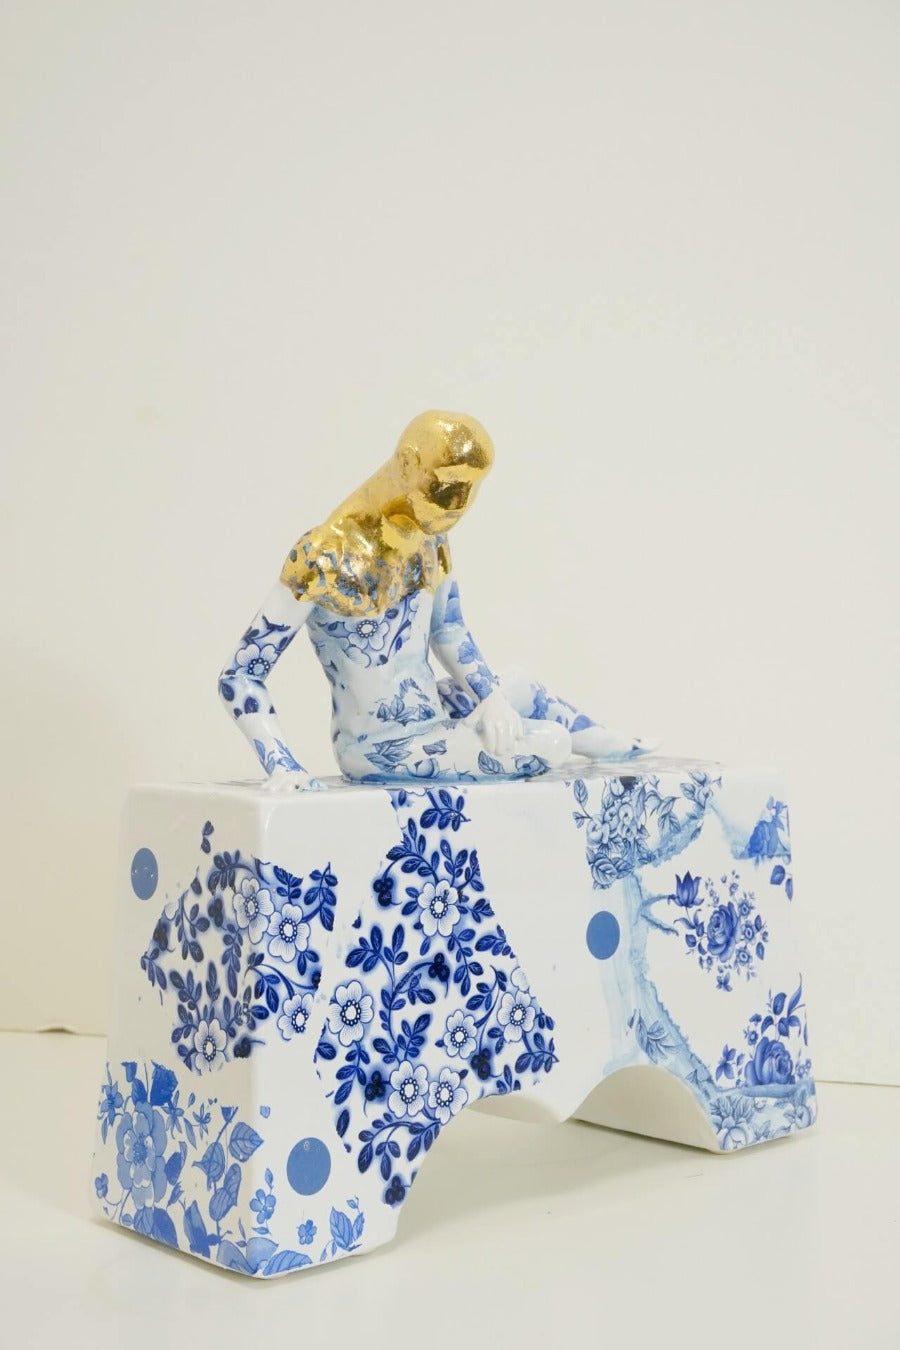 Dying Pugilist by Pierre Williams | Contemporary Ceramics for sale at The Biscuit Factory Newcastle